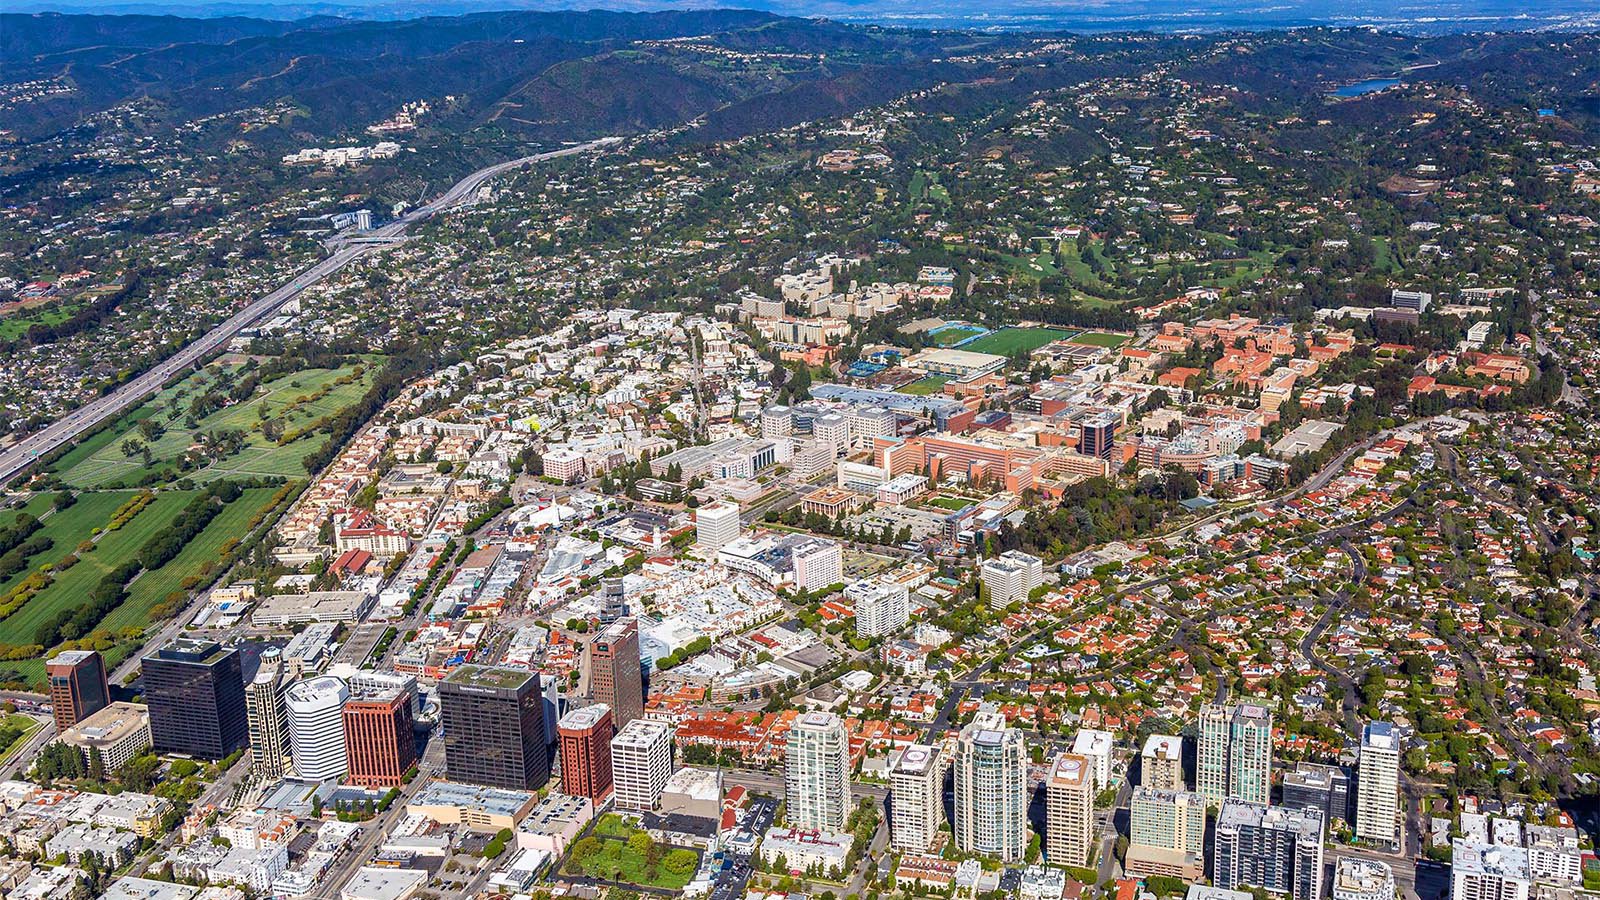 School photo of the University of California, Los Angeles (UCLA) in Westwood, California